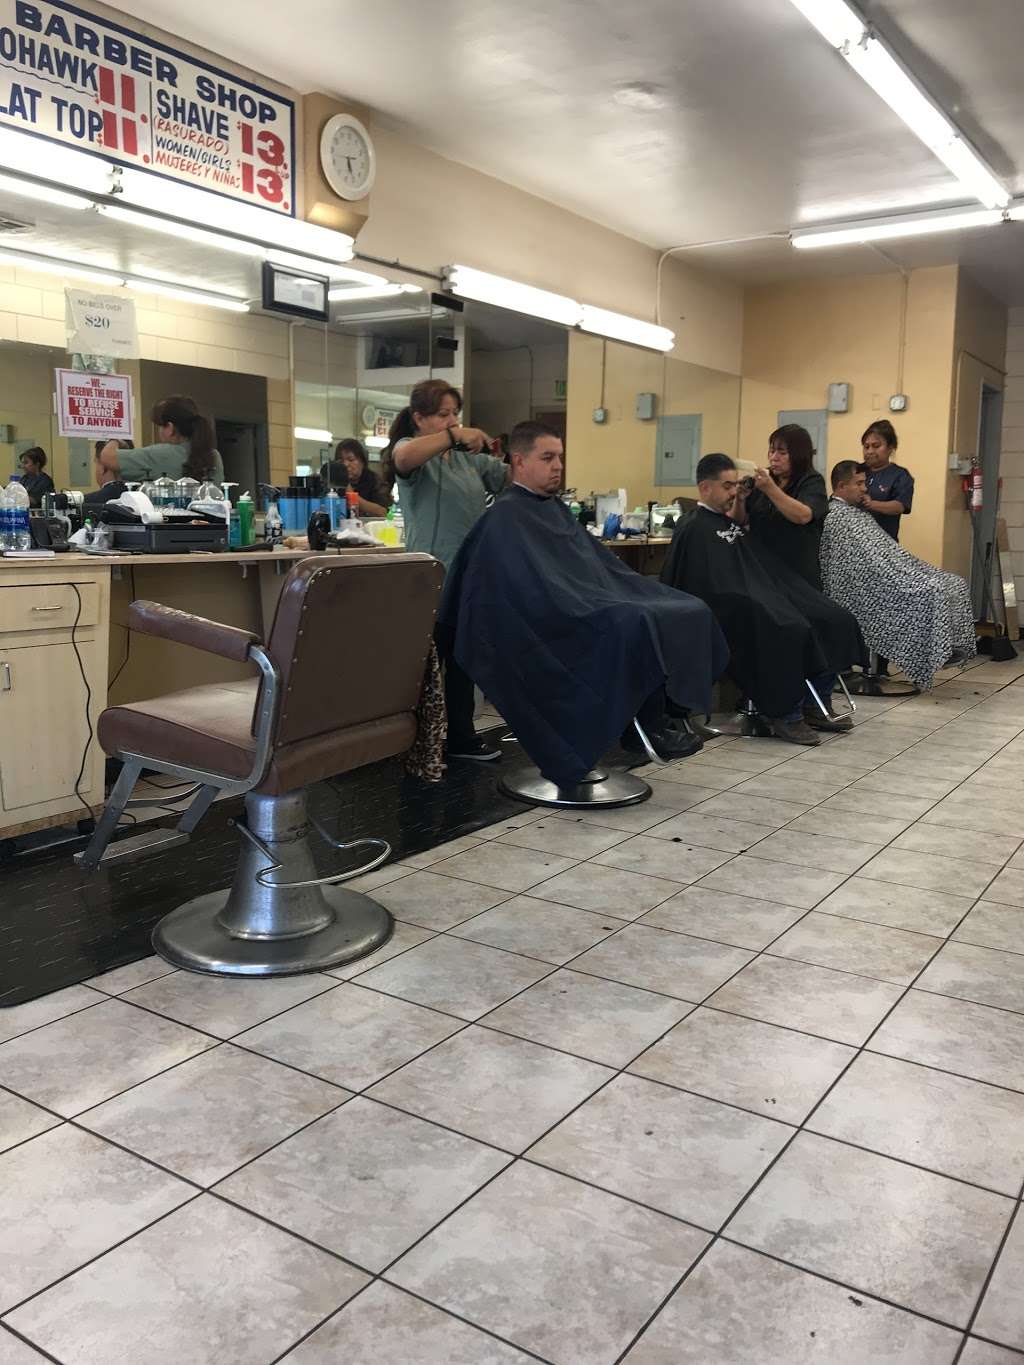 Friends Barber Shop | 657 Giano Ave, City of Industry, CA 91748 | Phone: (626) 581-7707